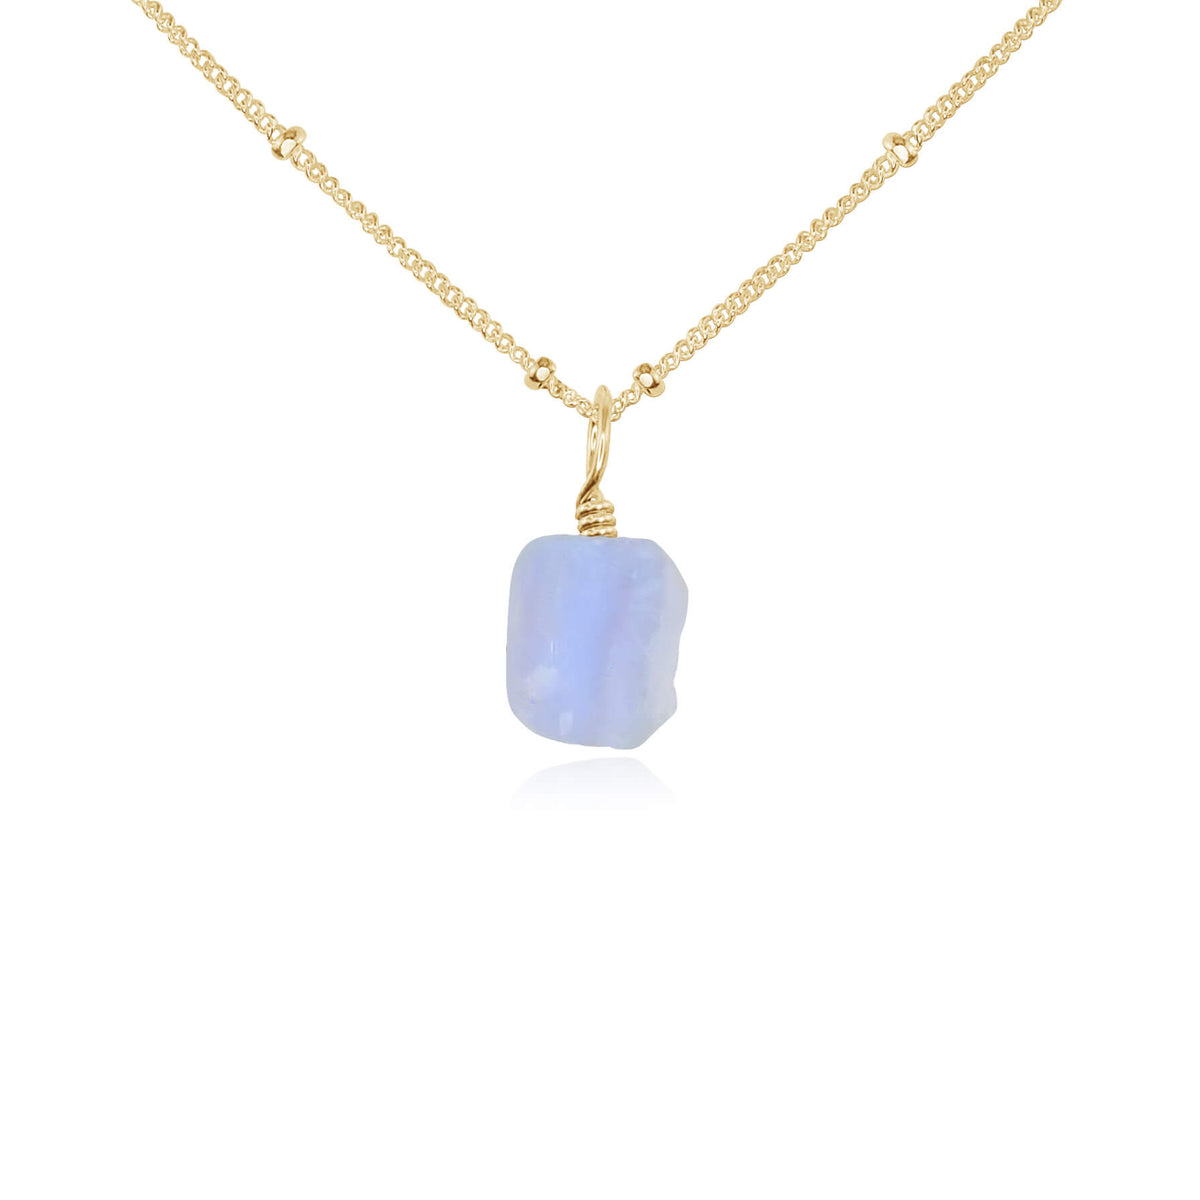 Raw Crystal Pendant Necklace - Blue Lace Agate - 14K Gold Fill Satellite - Luna Tide Handmade Jewellery